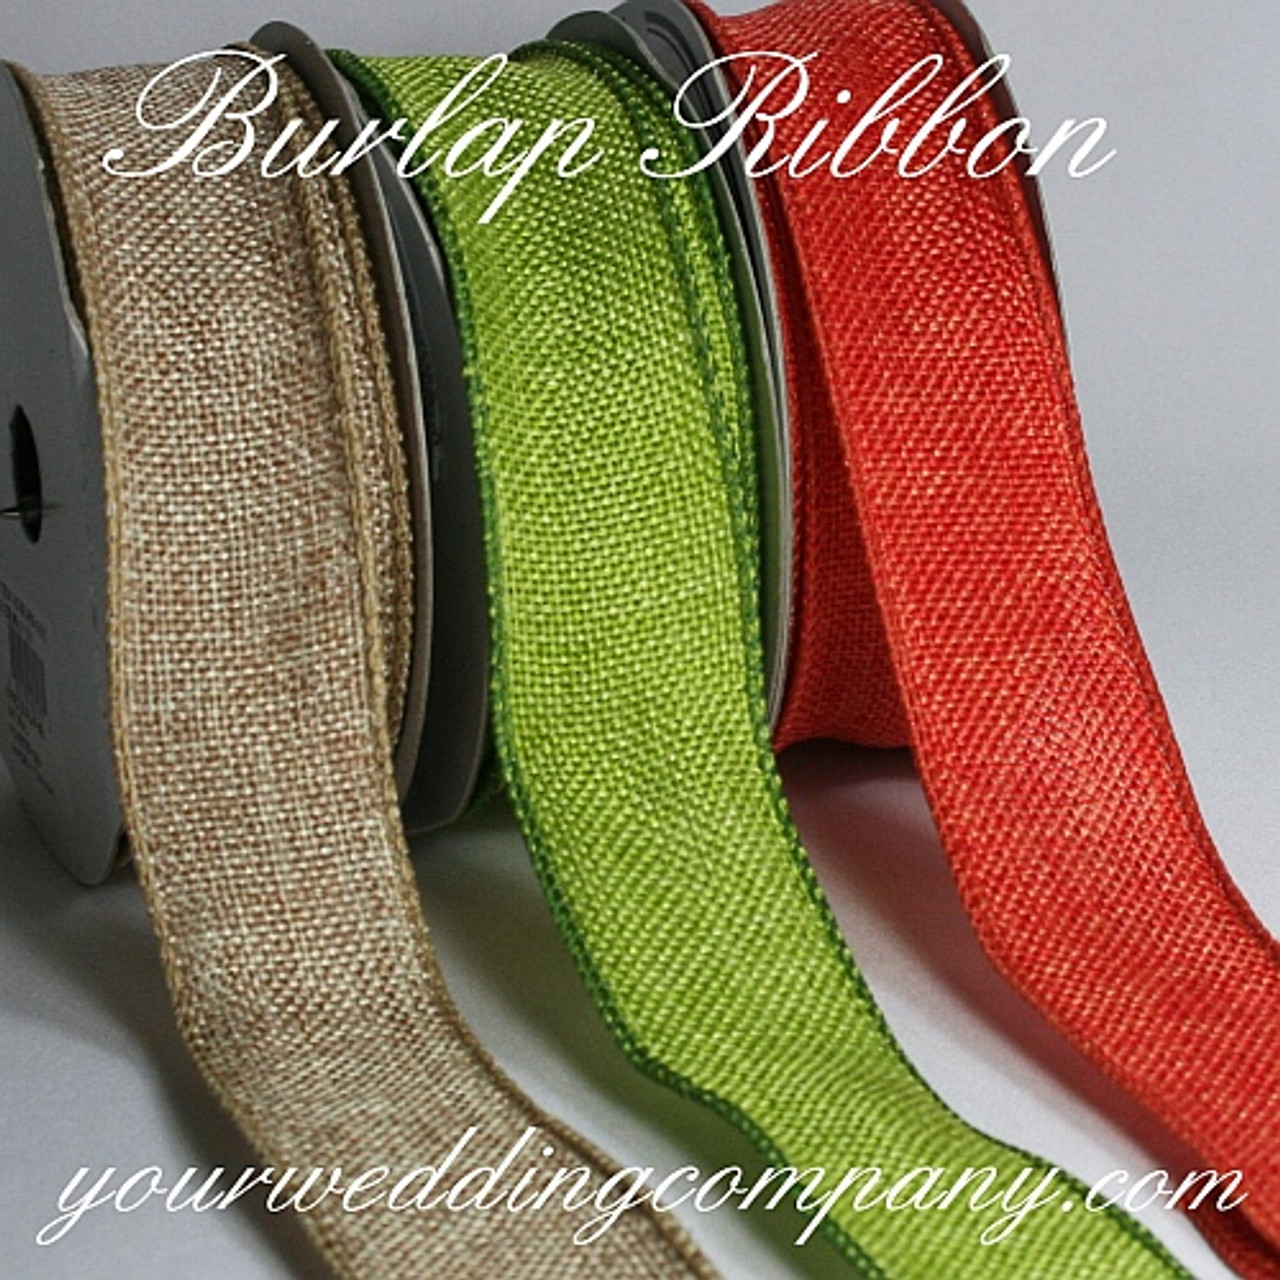 Burlap Roll Fabric Ribbon, Burlap Ribbon For Crafts, Burlap Flower Wrap,  Rustic Ribbon For Gifts, Holidays And Decorations